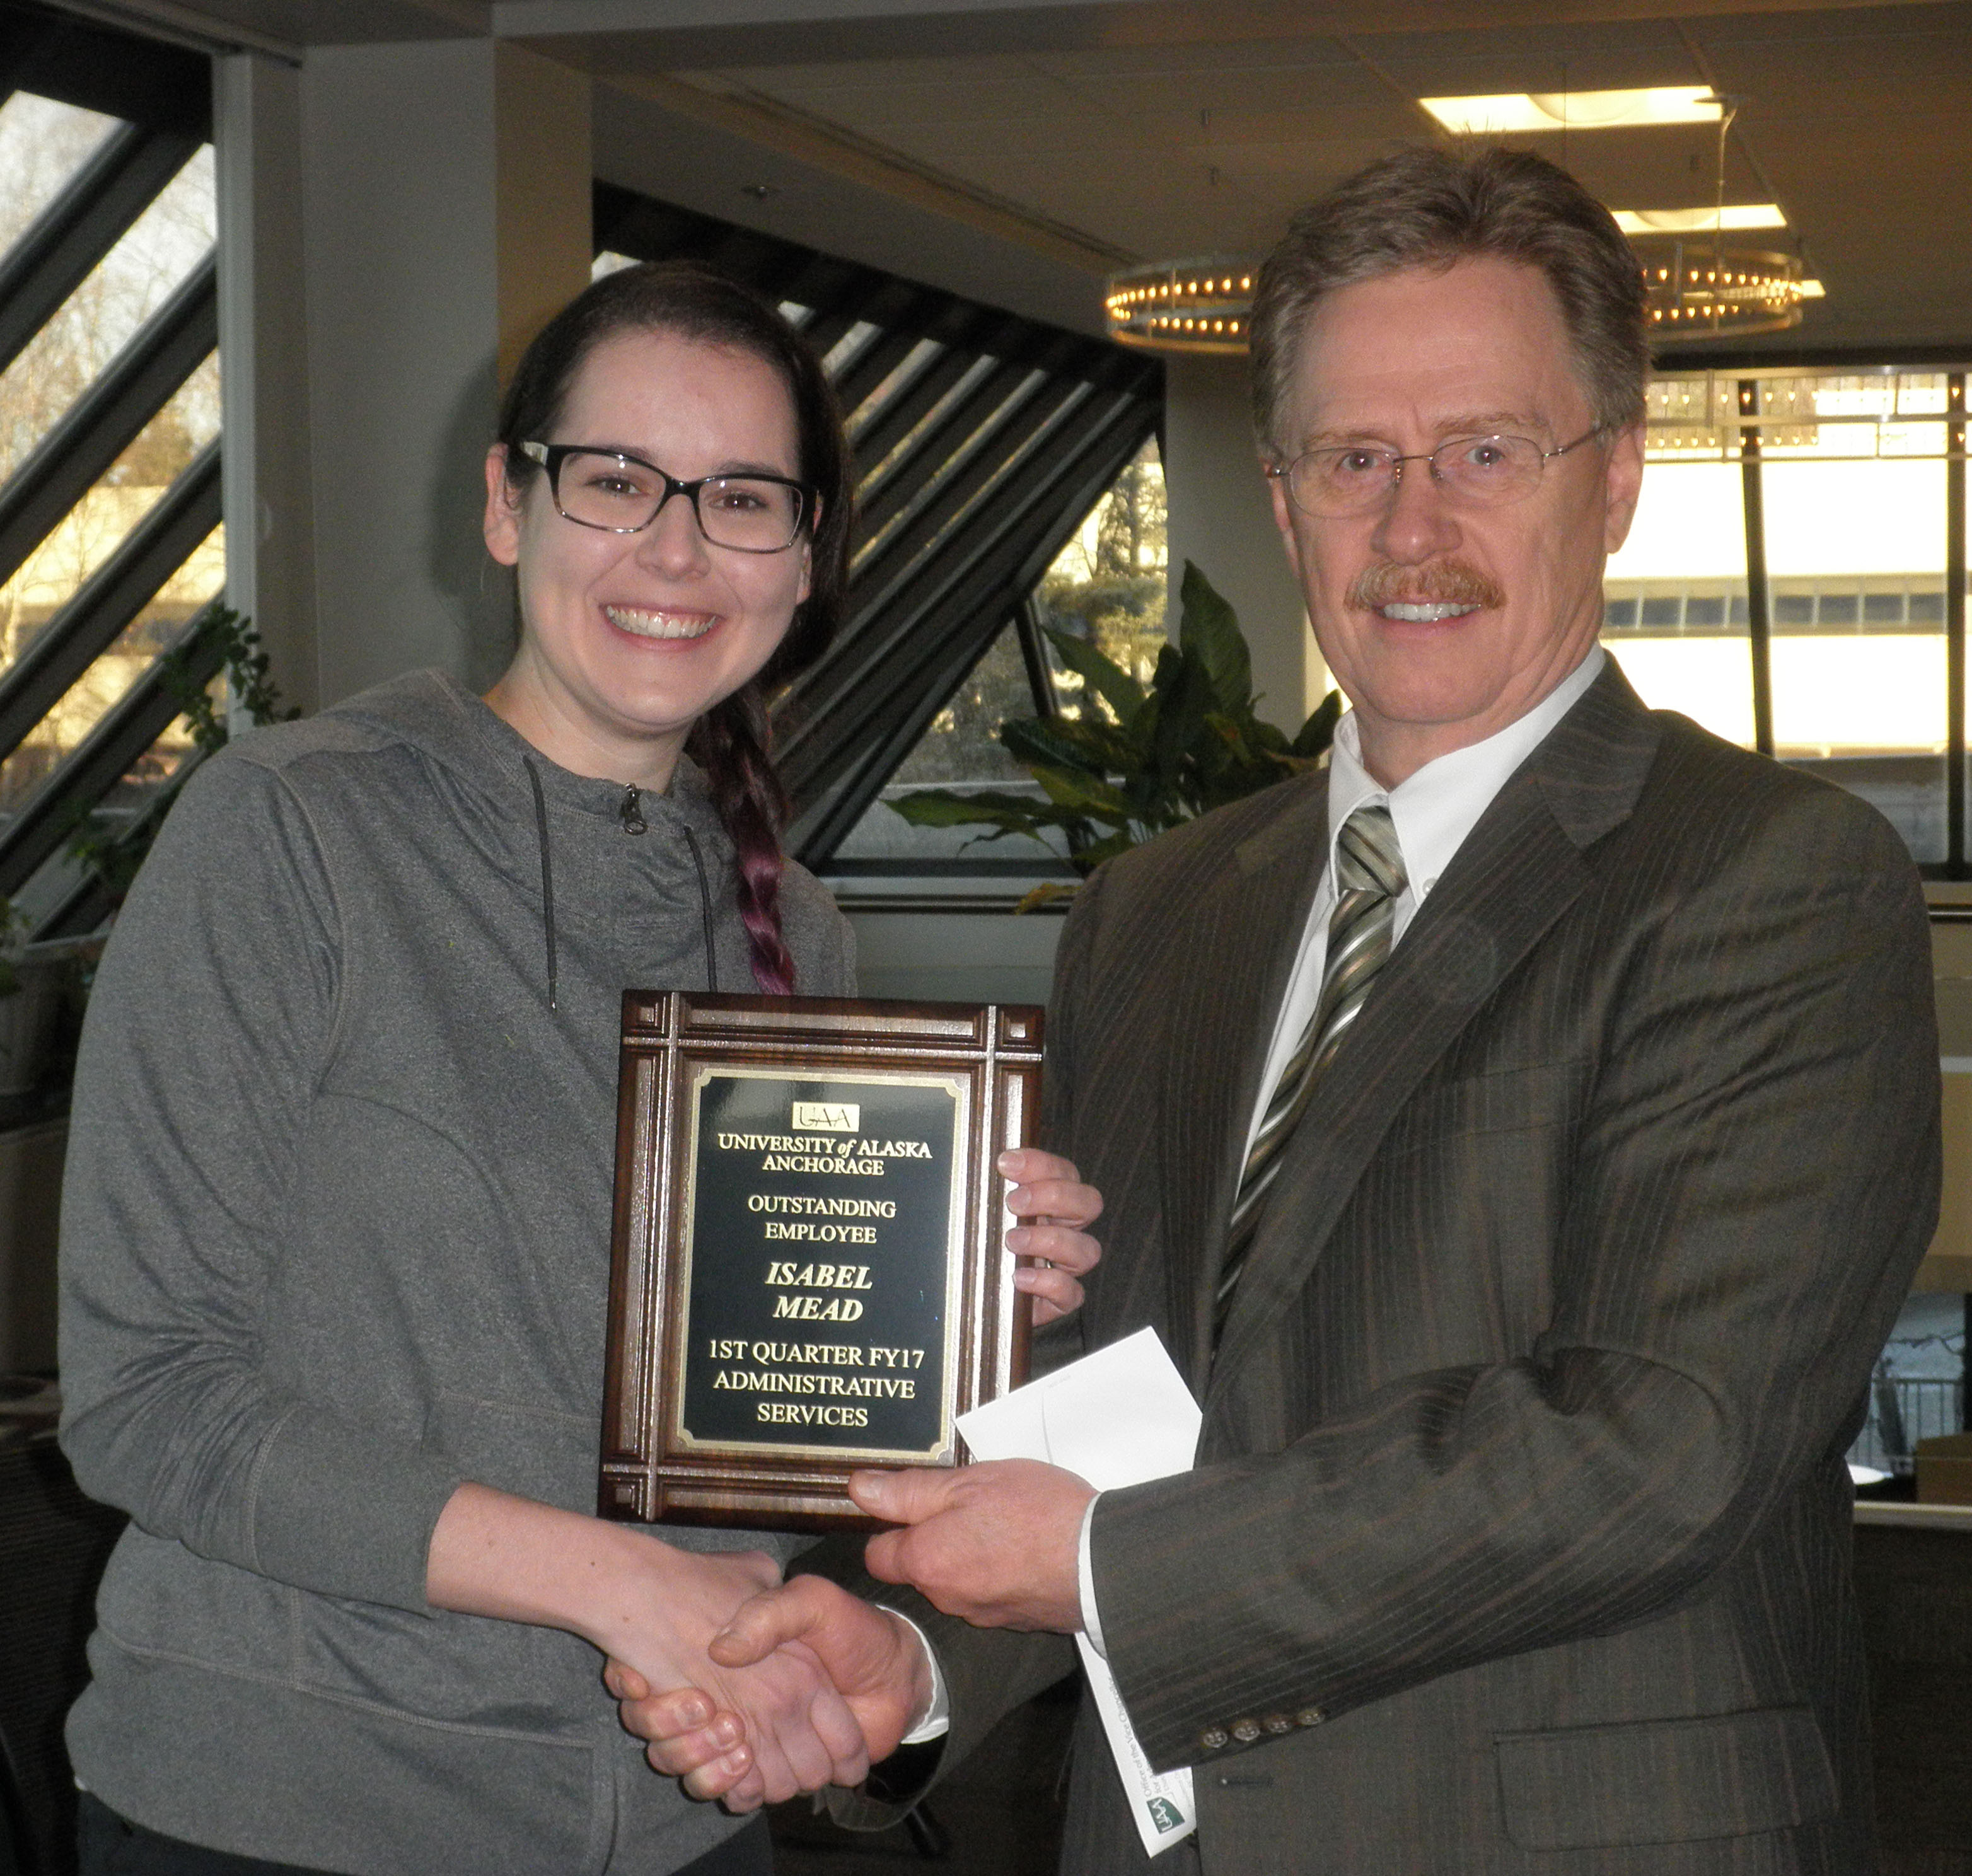 Isabel Mead receiving Employee of the 1st Quarter from Pat Shier FY17